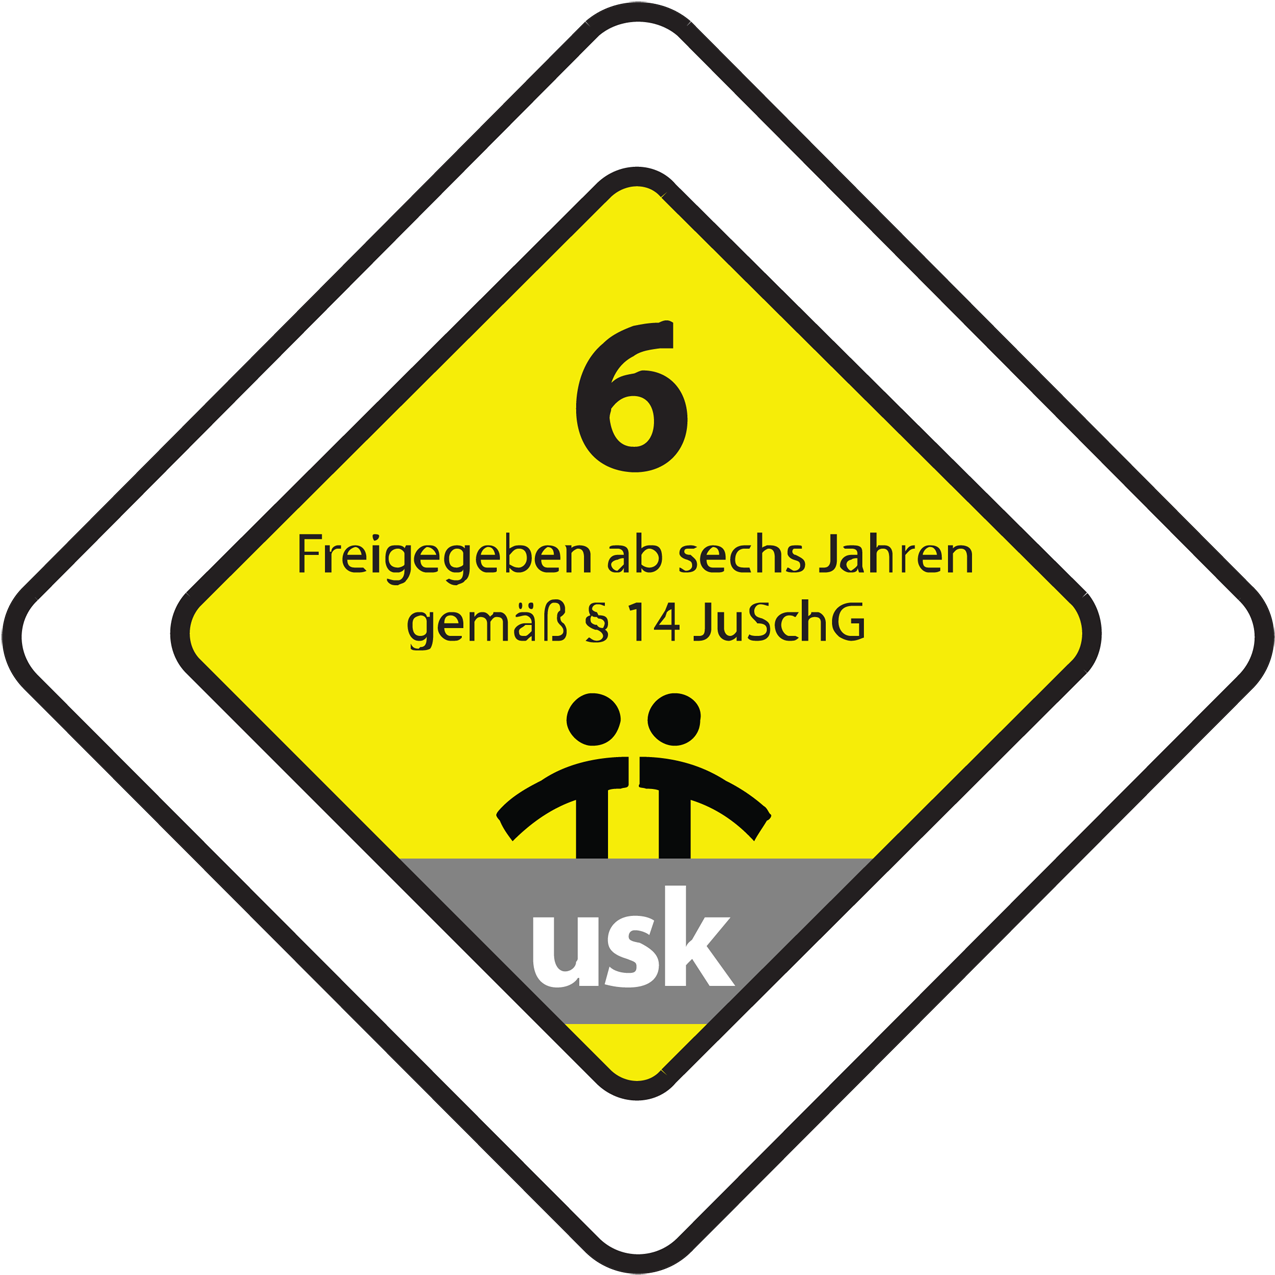 Usk 6 - Traffic Information Signs - Truck Crossing Left Pictorial (1280x1284)